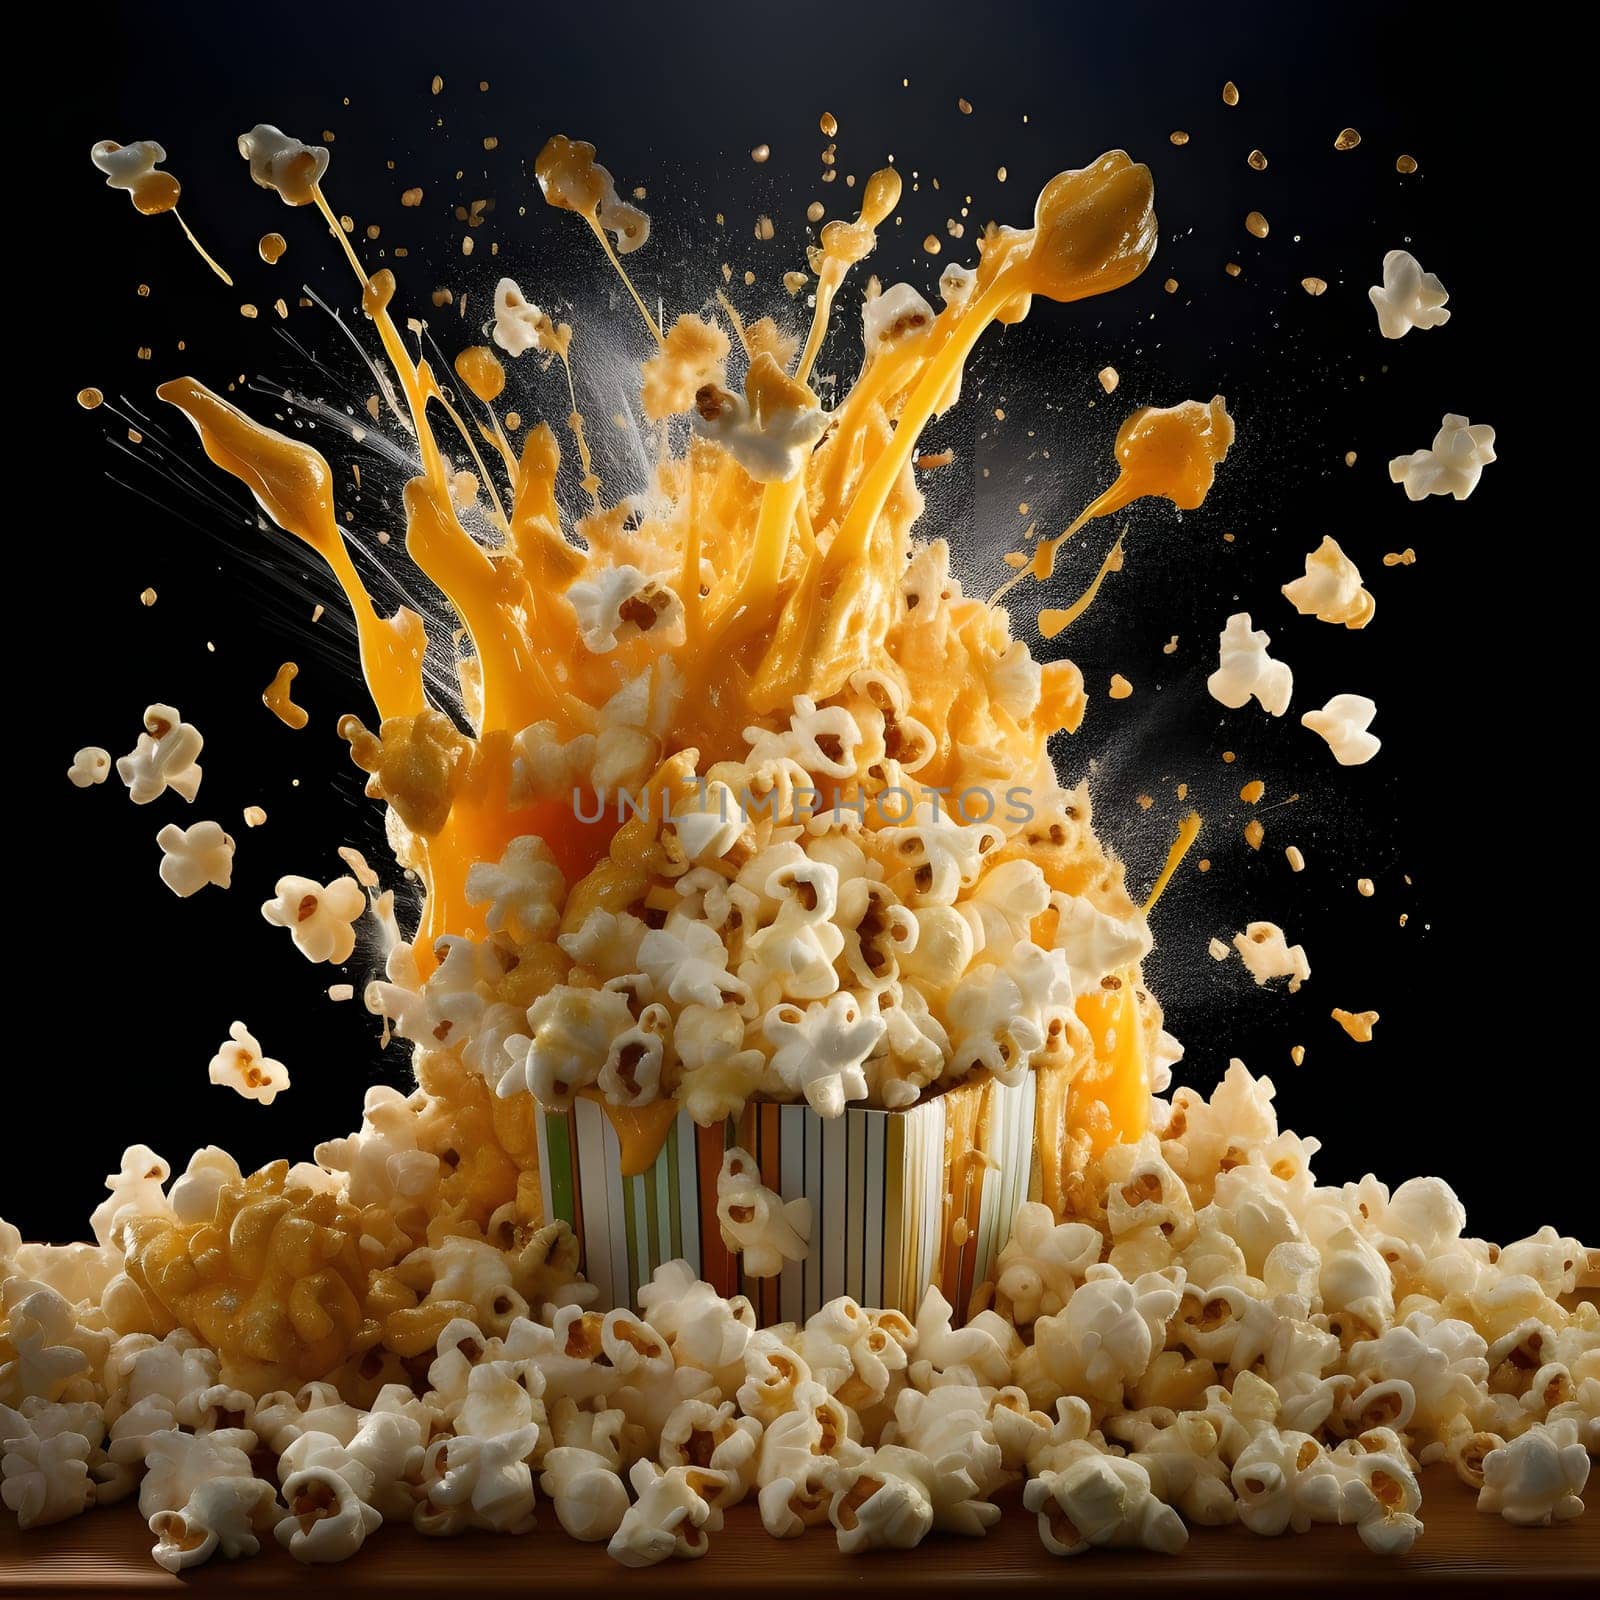 Paper box and in a sealant popcorn with sauce on a black background. Corn as a dish of thanksgiving for the harvest. An atmosphere of joy and celebration.